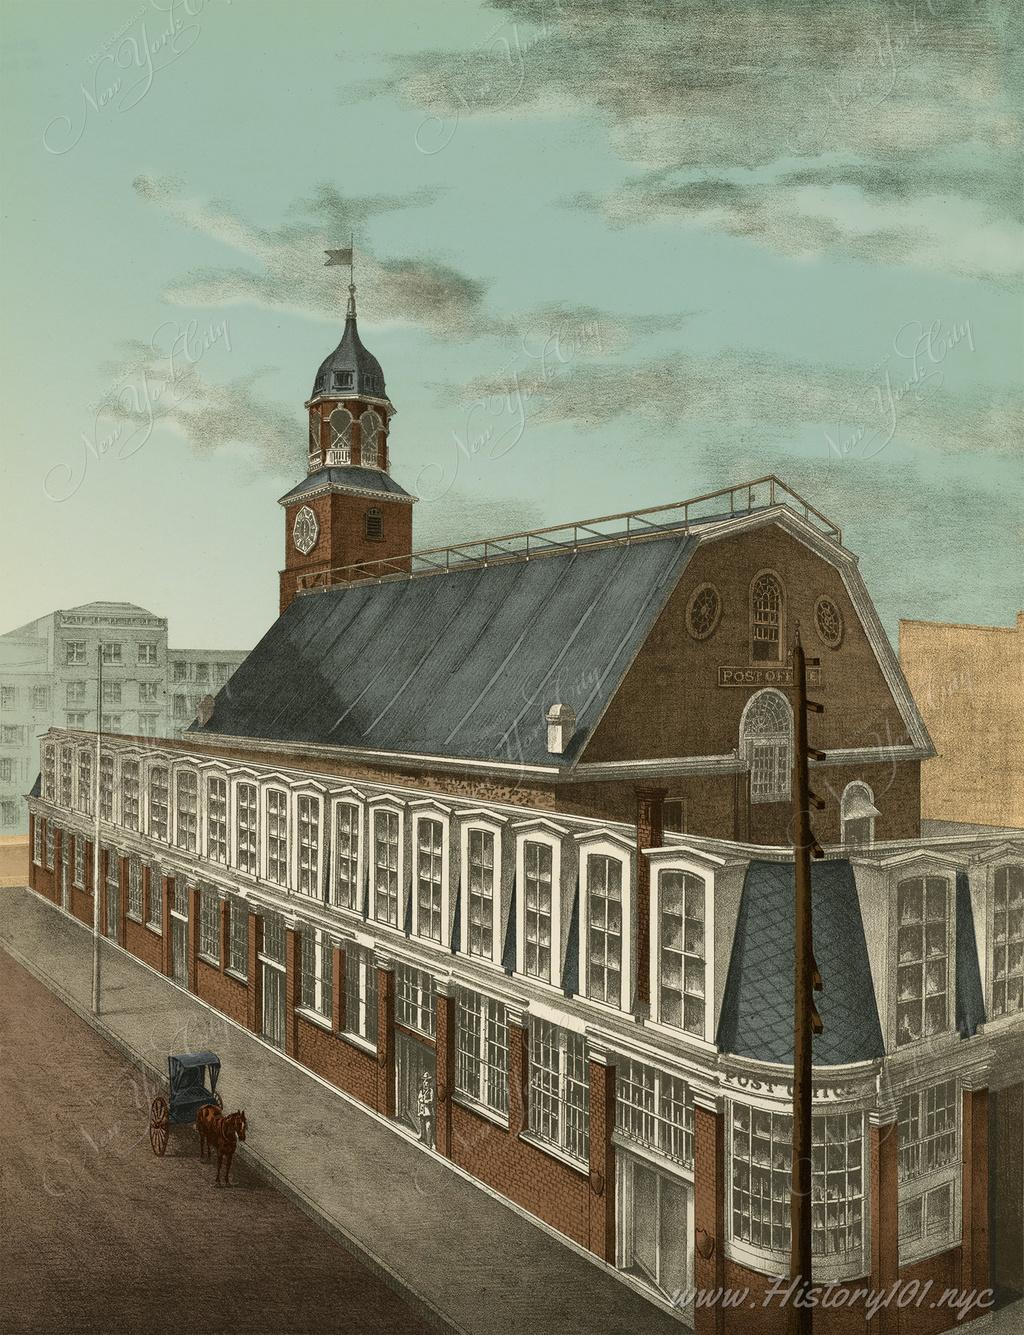 Explore the birth of the U.S. postal system in 1775, Franklin's role, and NYC's critical impact on commerce and politics during the American Revolution